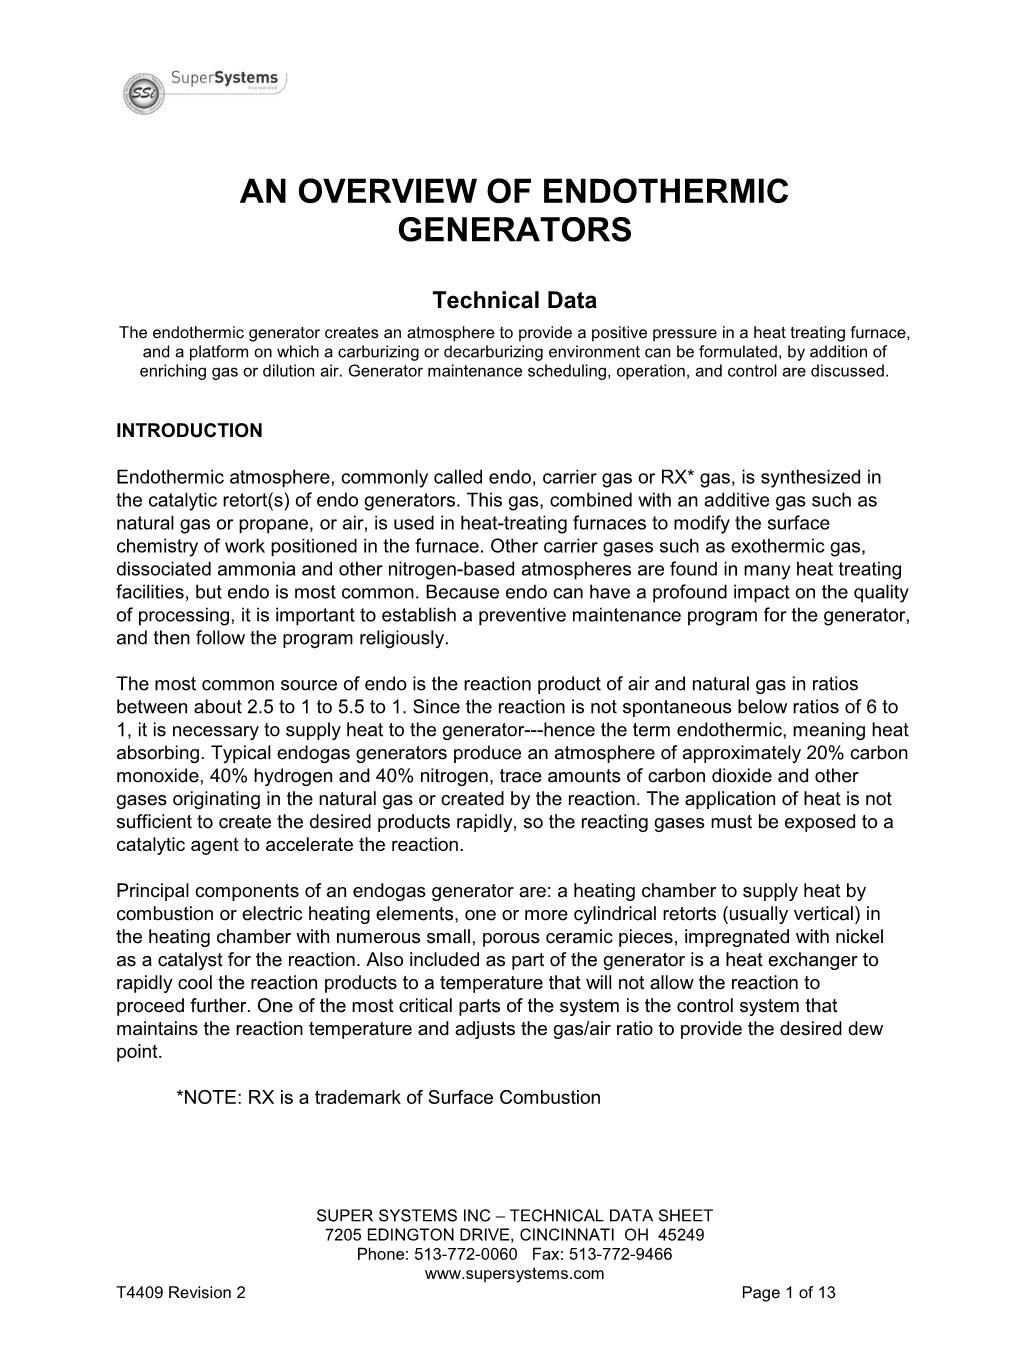 An Overview of Endothermic Generators